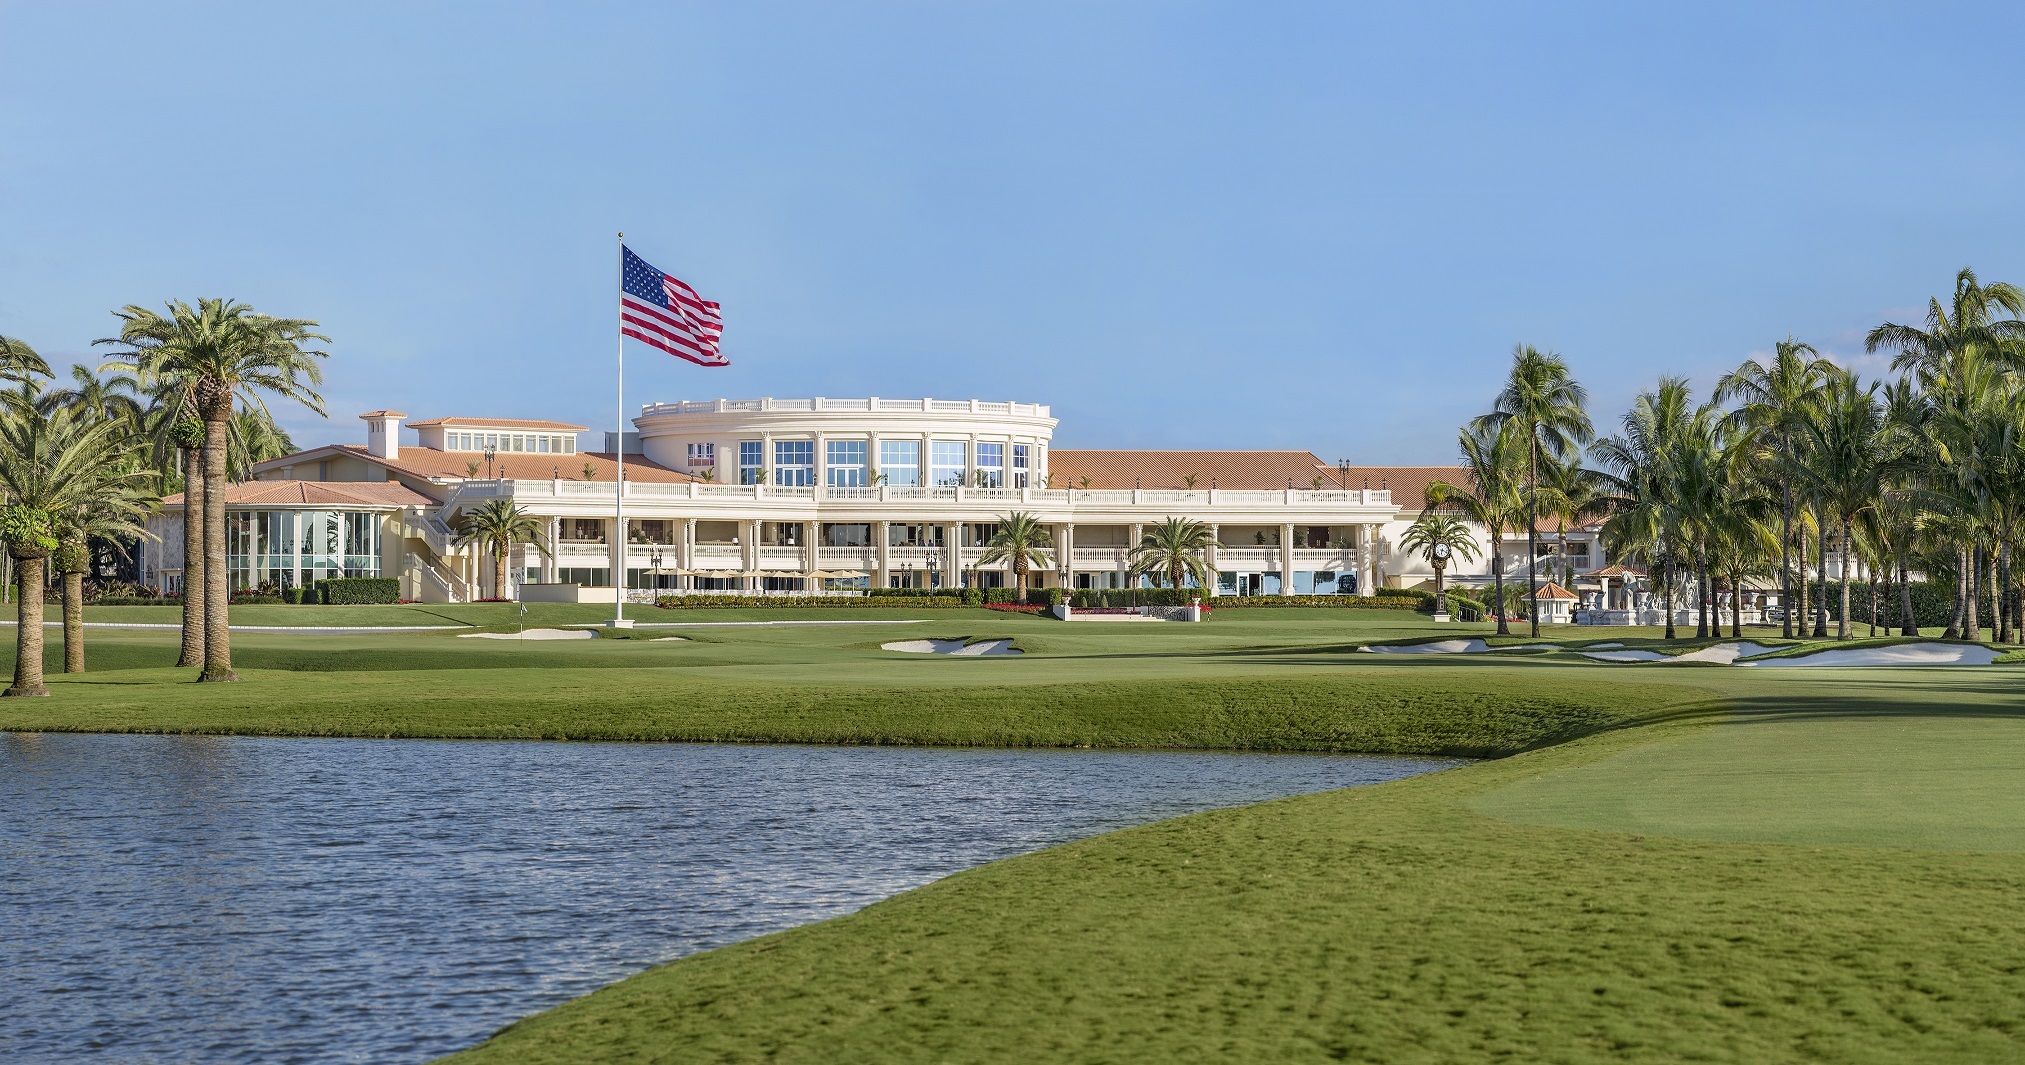 Golf Vacation Package - Great Deal at Doral: Blue Monster Stay & Play + FREE REPLAYS from $325 per day!